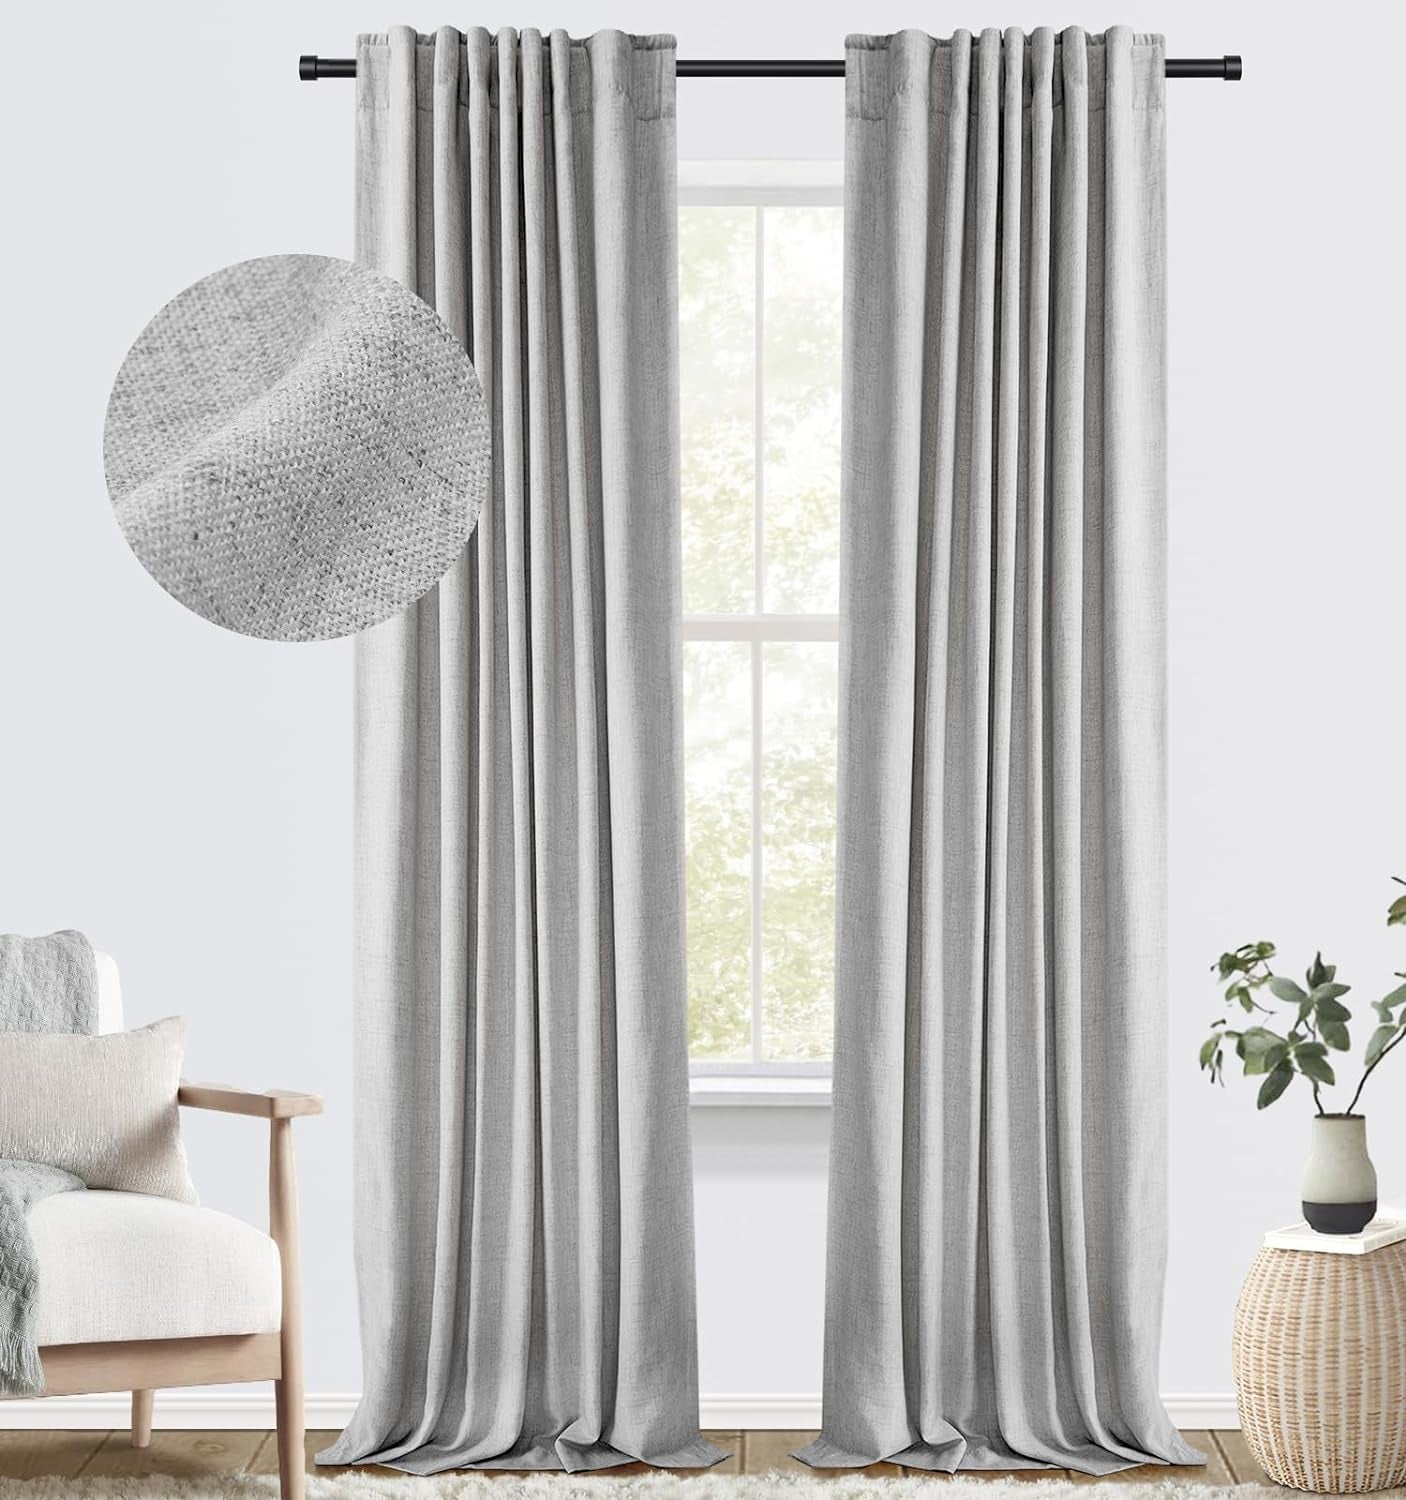 100% Blackout Shield Blackout Curtains for Bedroom Faux Linen Black Out Curtains 84 Inch Length 2 Panels Set, Back Tab/Rod Pocket Thermal Insulated Curtains with Black Liner, 50W X 84L, Dark Grey  100% Blackout Shield 07 Grey 50''W X 108''L 